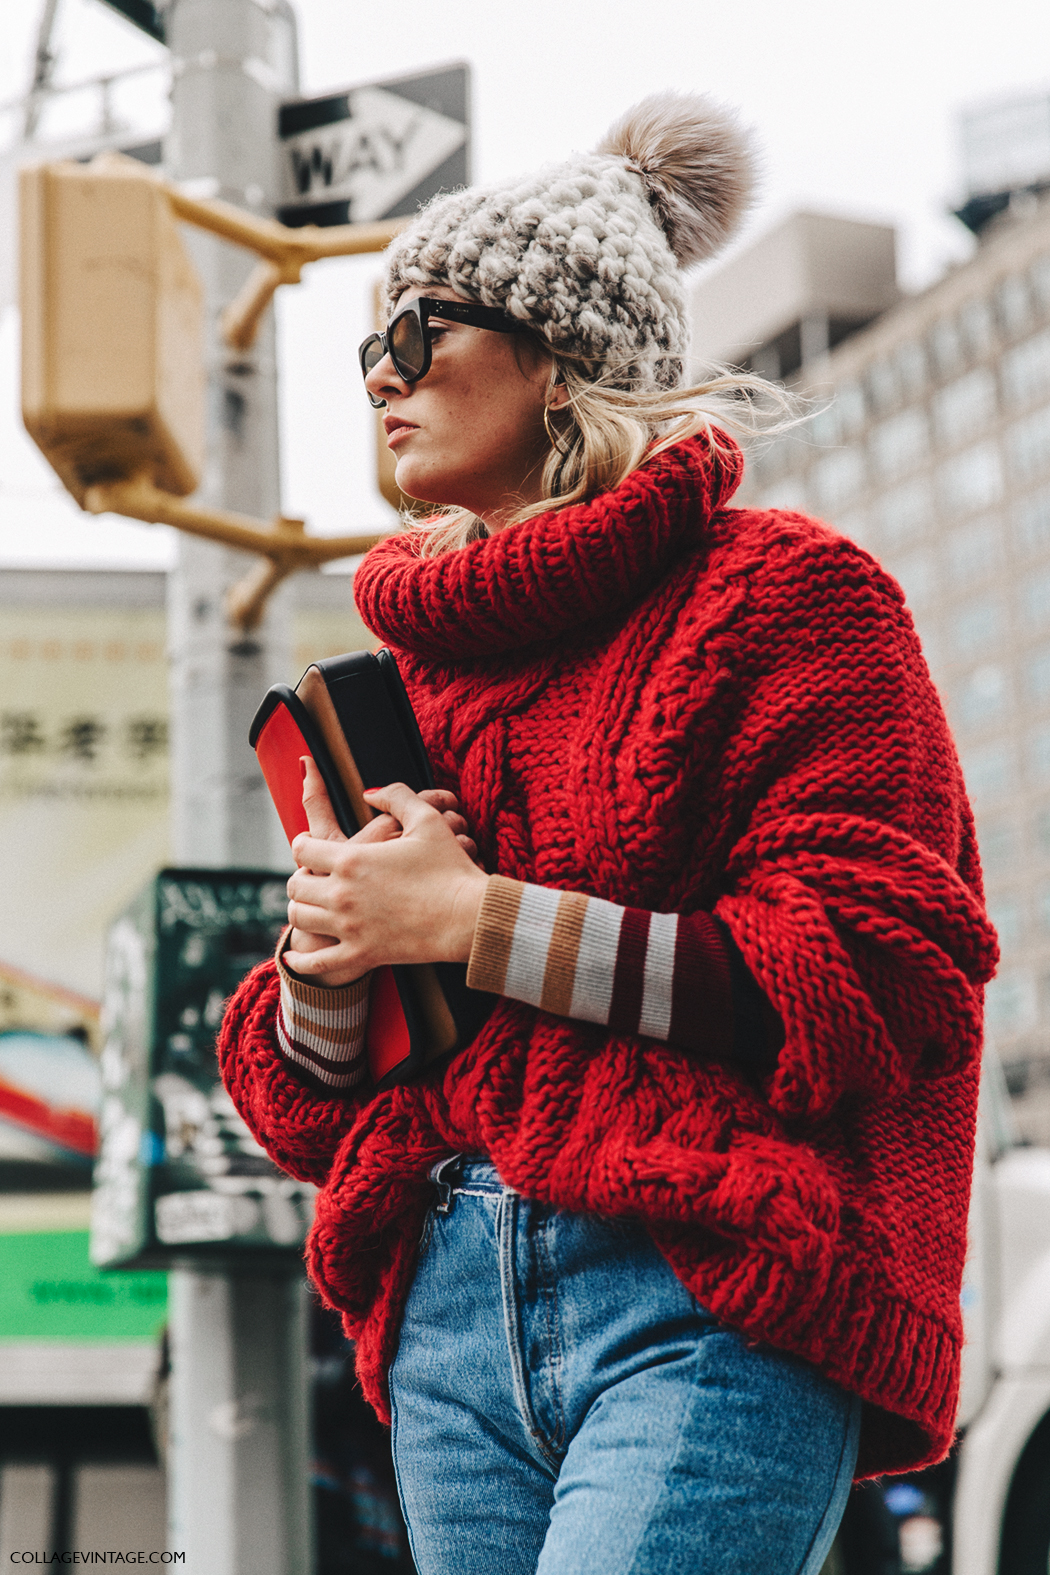 NYFW-New_York_Fashion_Week-Fall_Winter-17-Street_Style-Camille_Charriere-Vetements_Jeans-Red_Sweater-Beanie-Snake_Boots-2